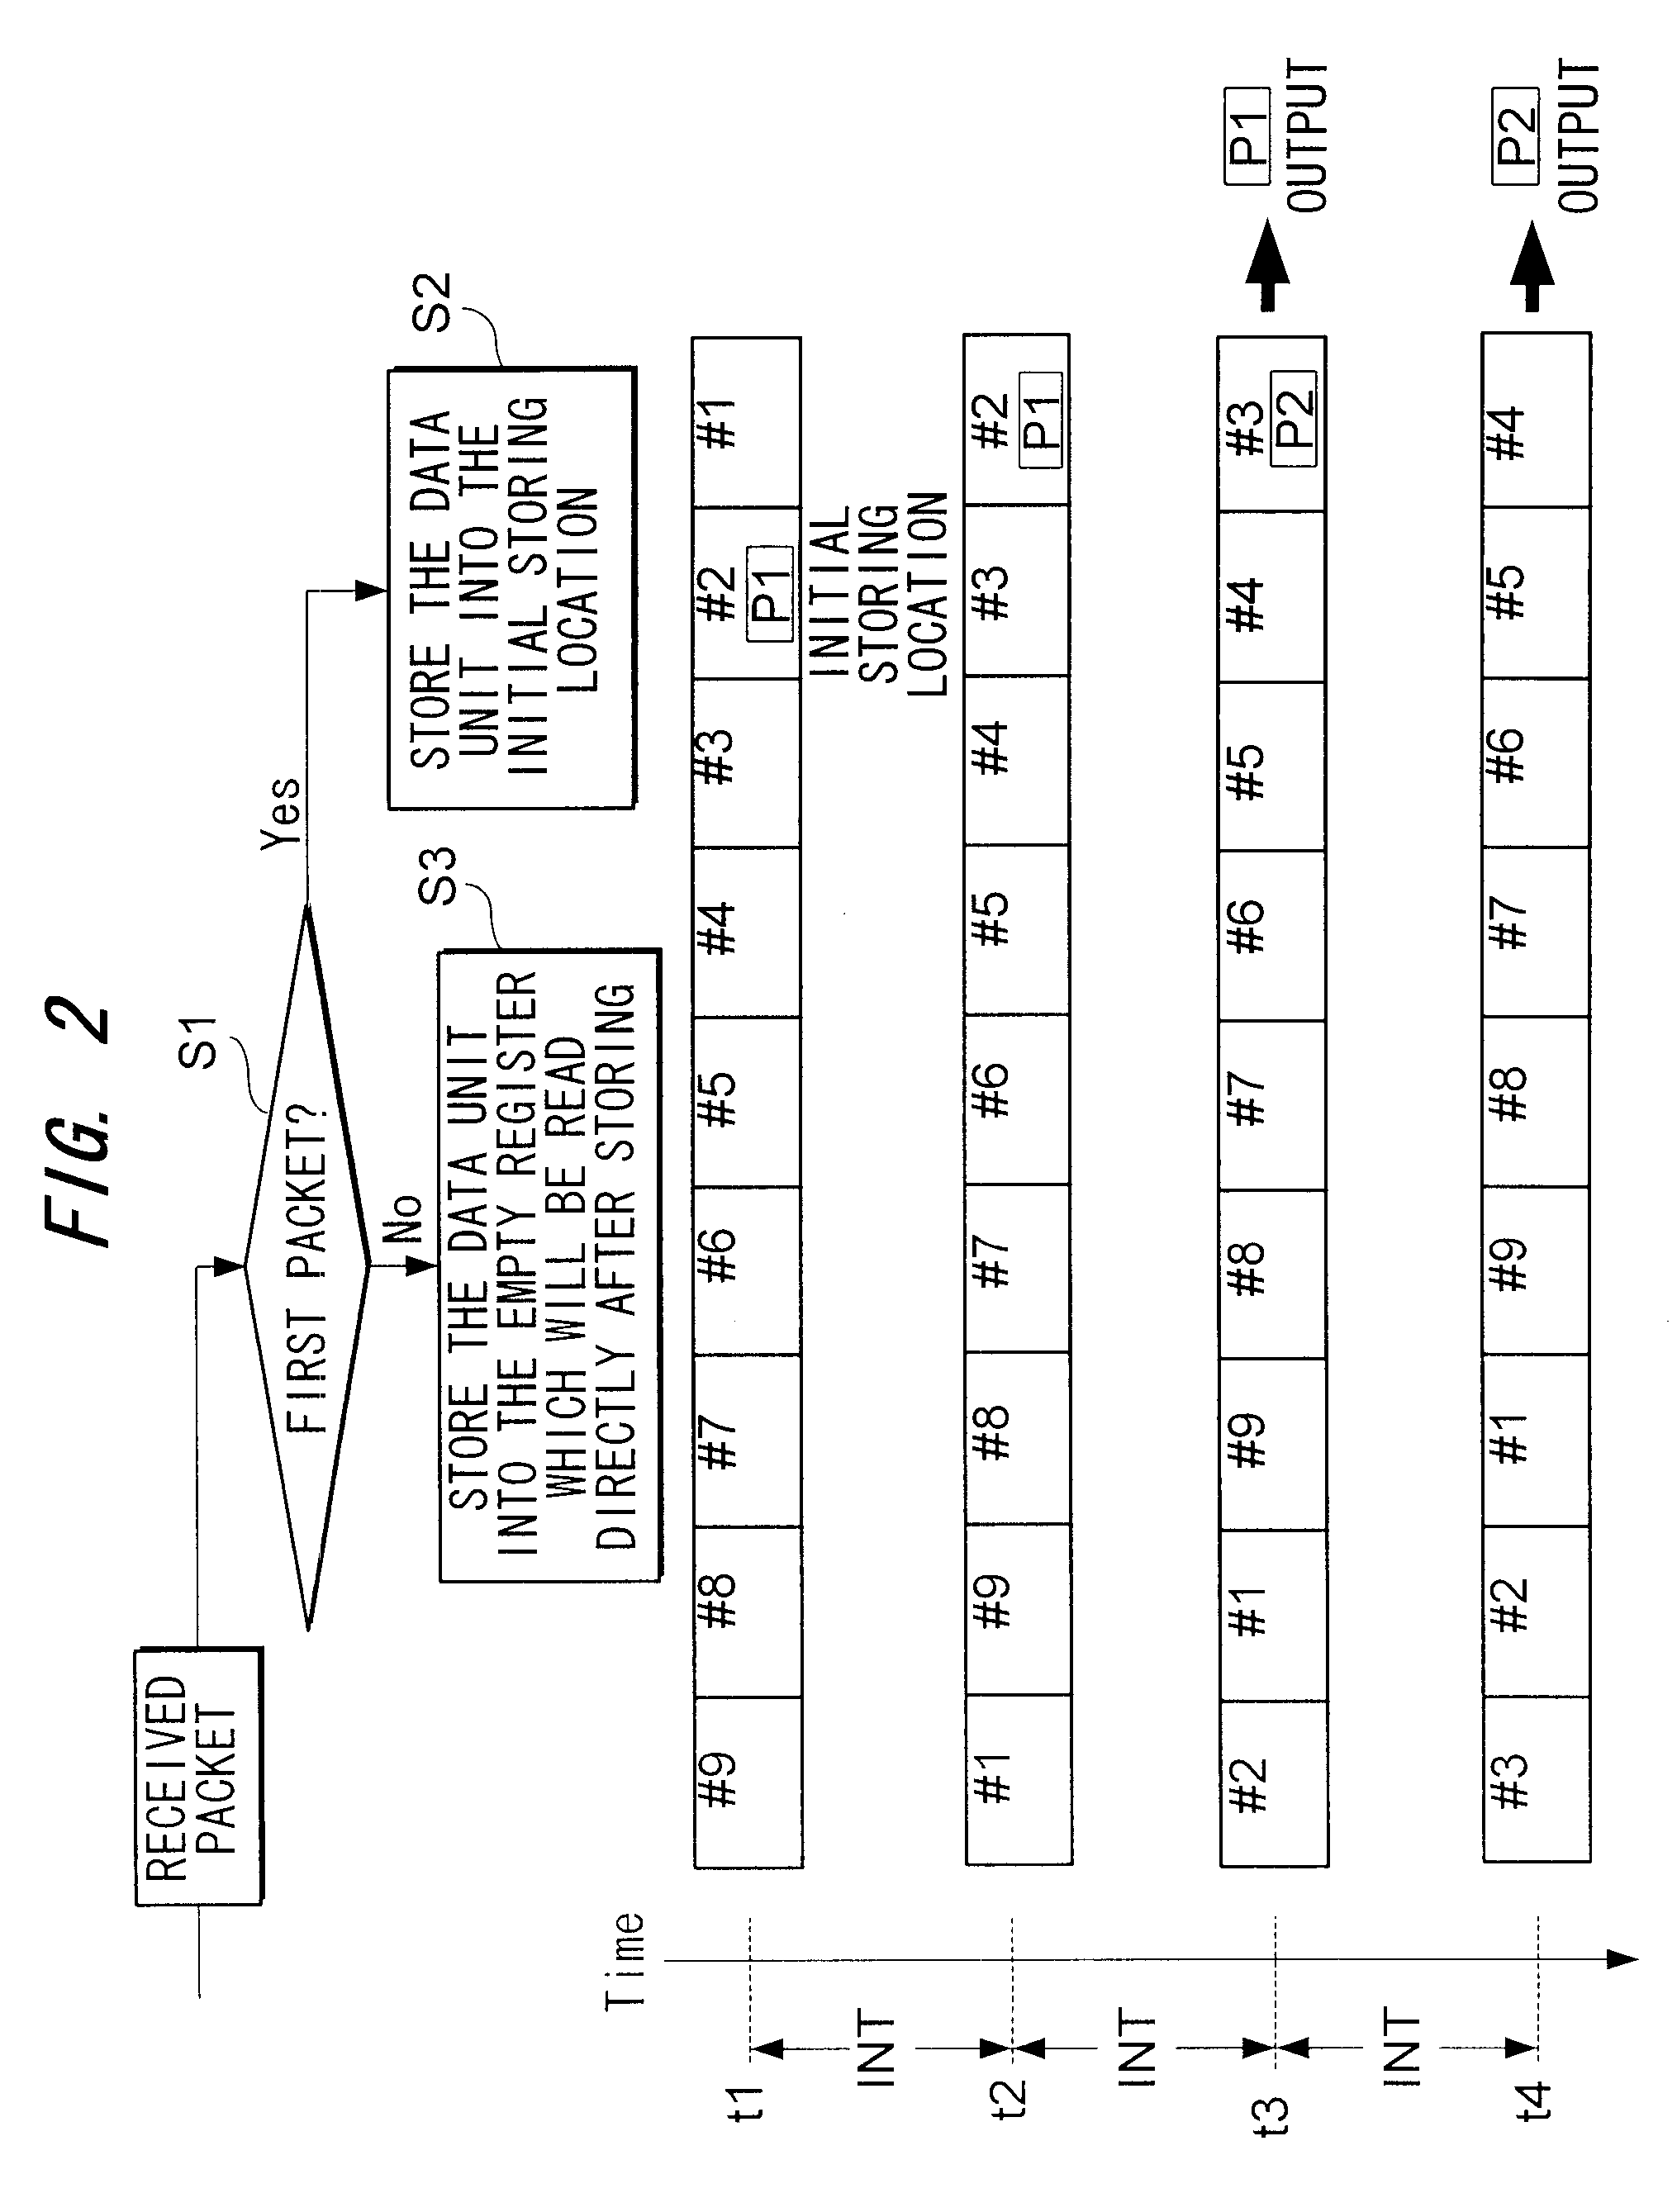 Gateway for reducing delay jitter and method for data transfer therein